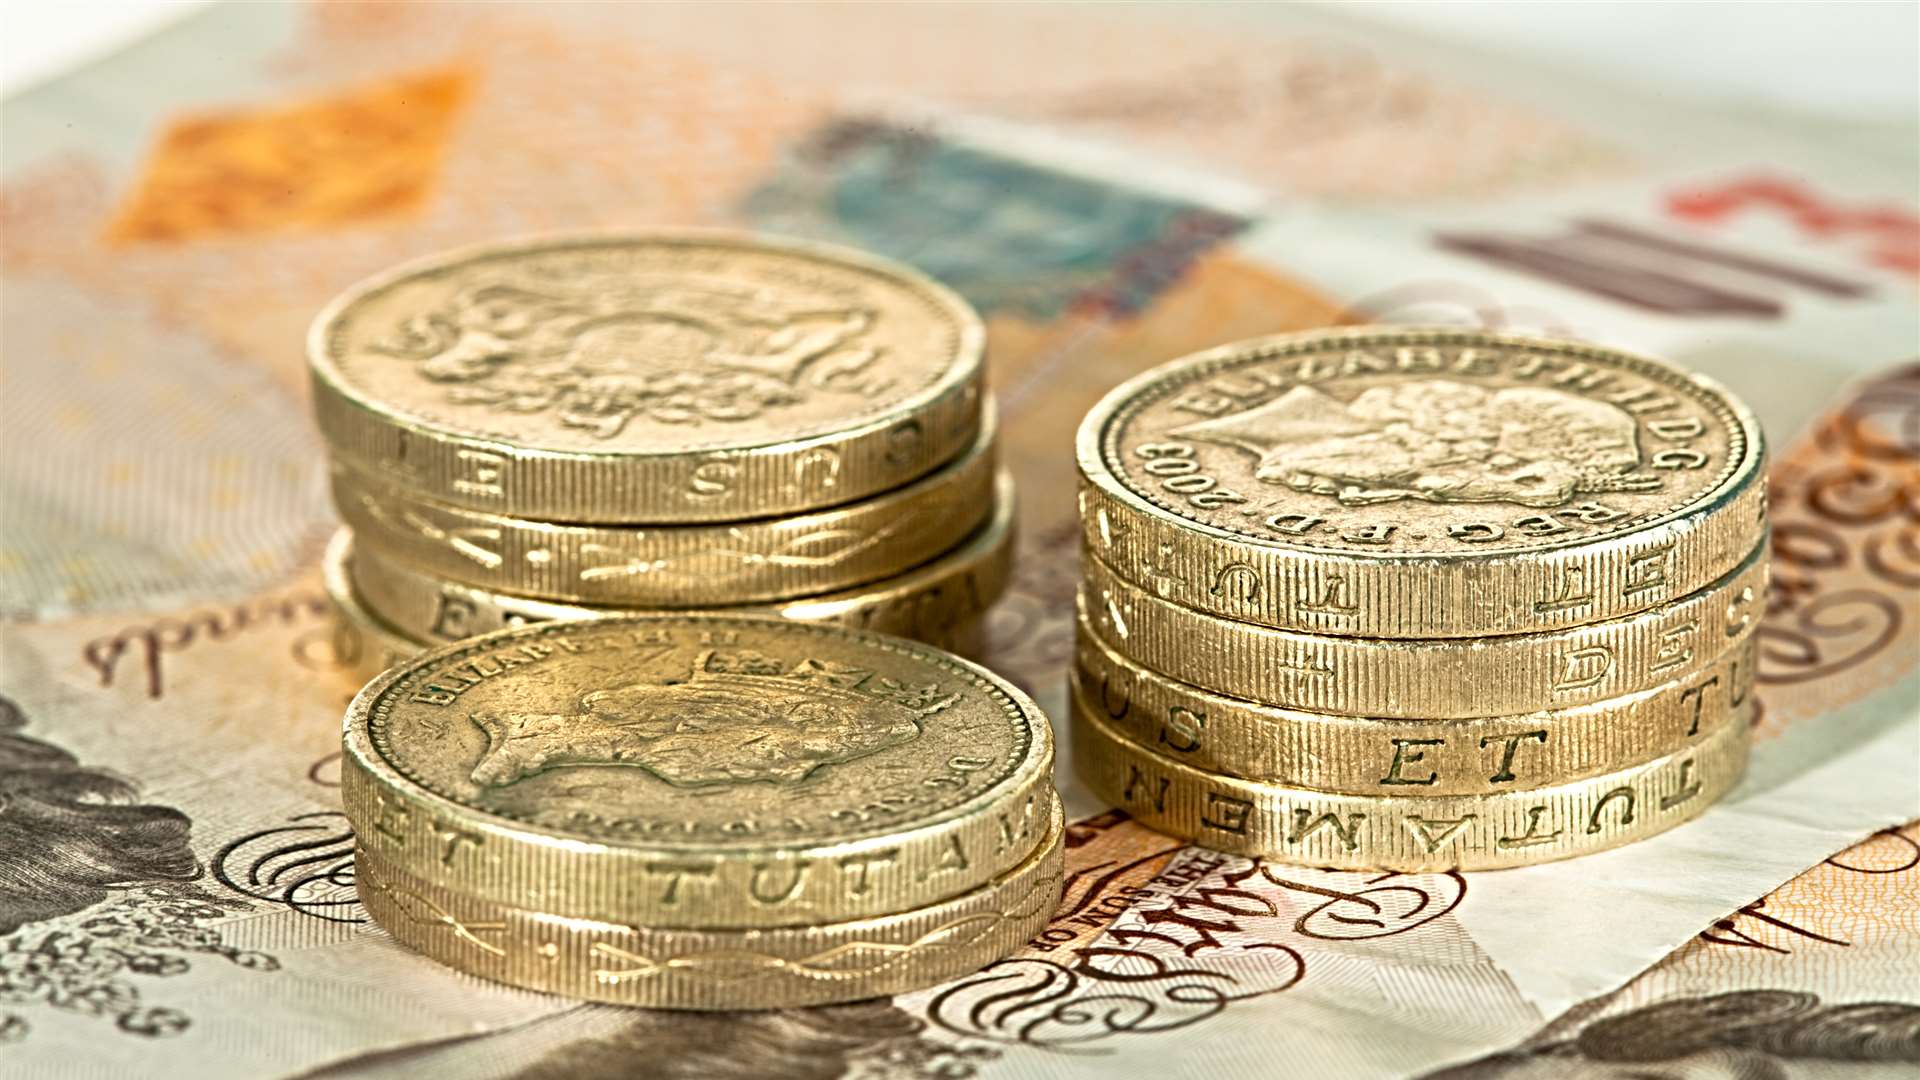 Businesses in Kent can apply for a loan from a £200 million fund set up for the county by HSBC